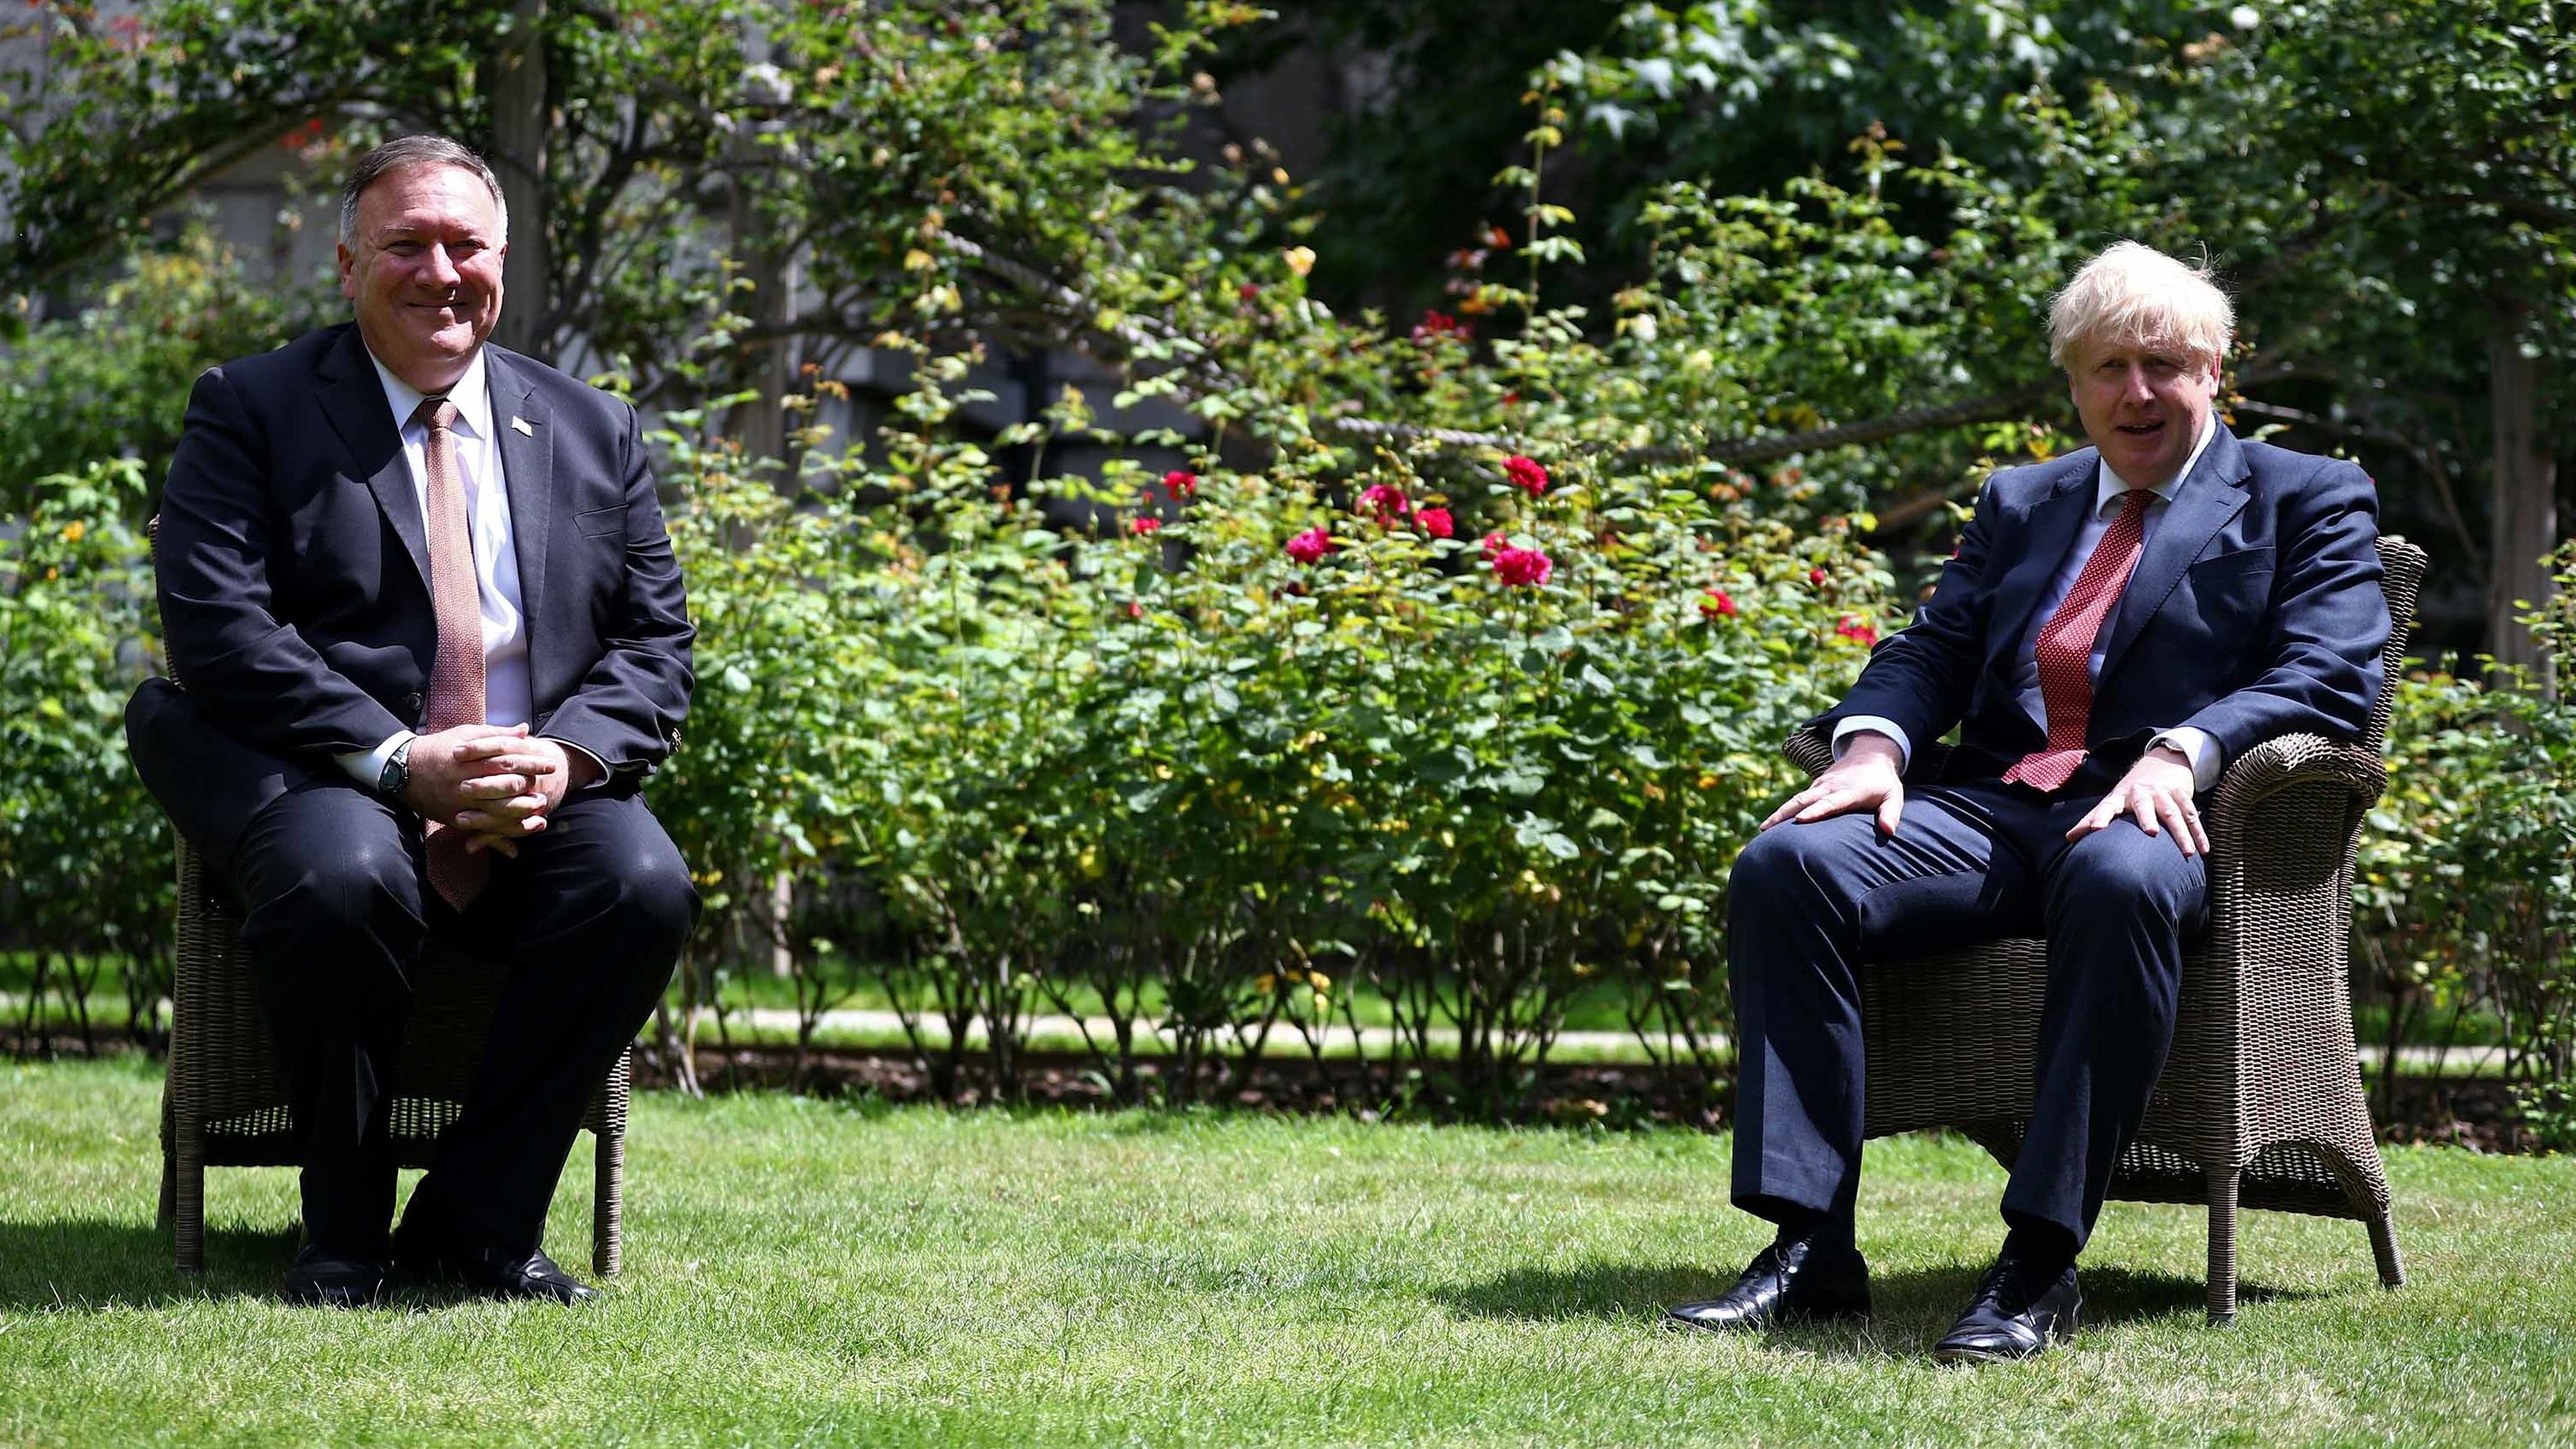 US Secretary of State Mike Pompeo sits across from Johnson in the garden of No. 10 Downing Street in July 2020.